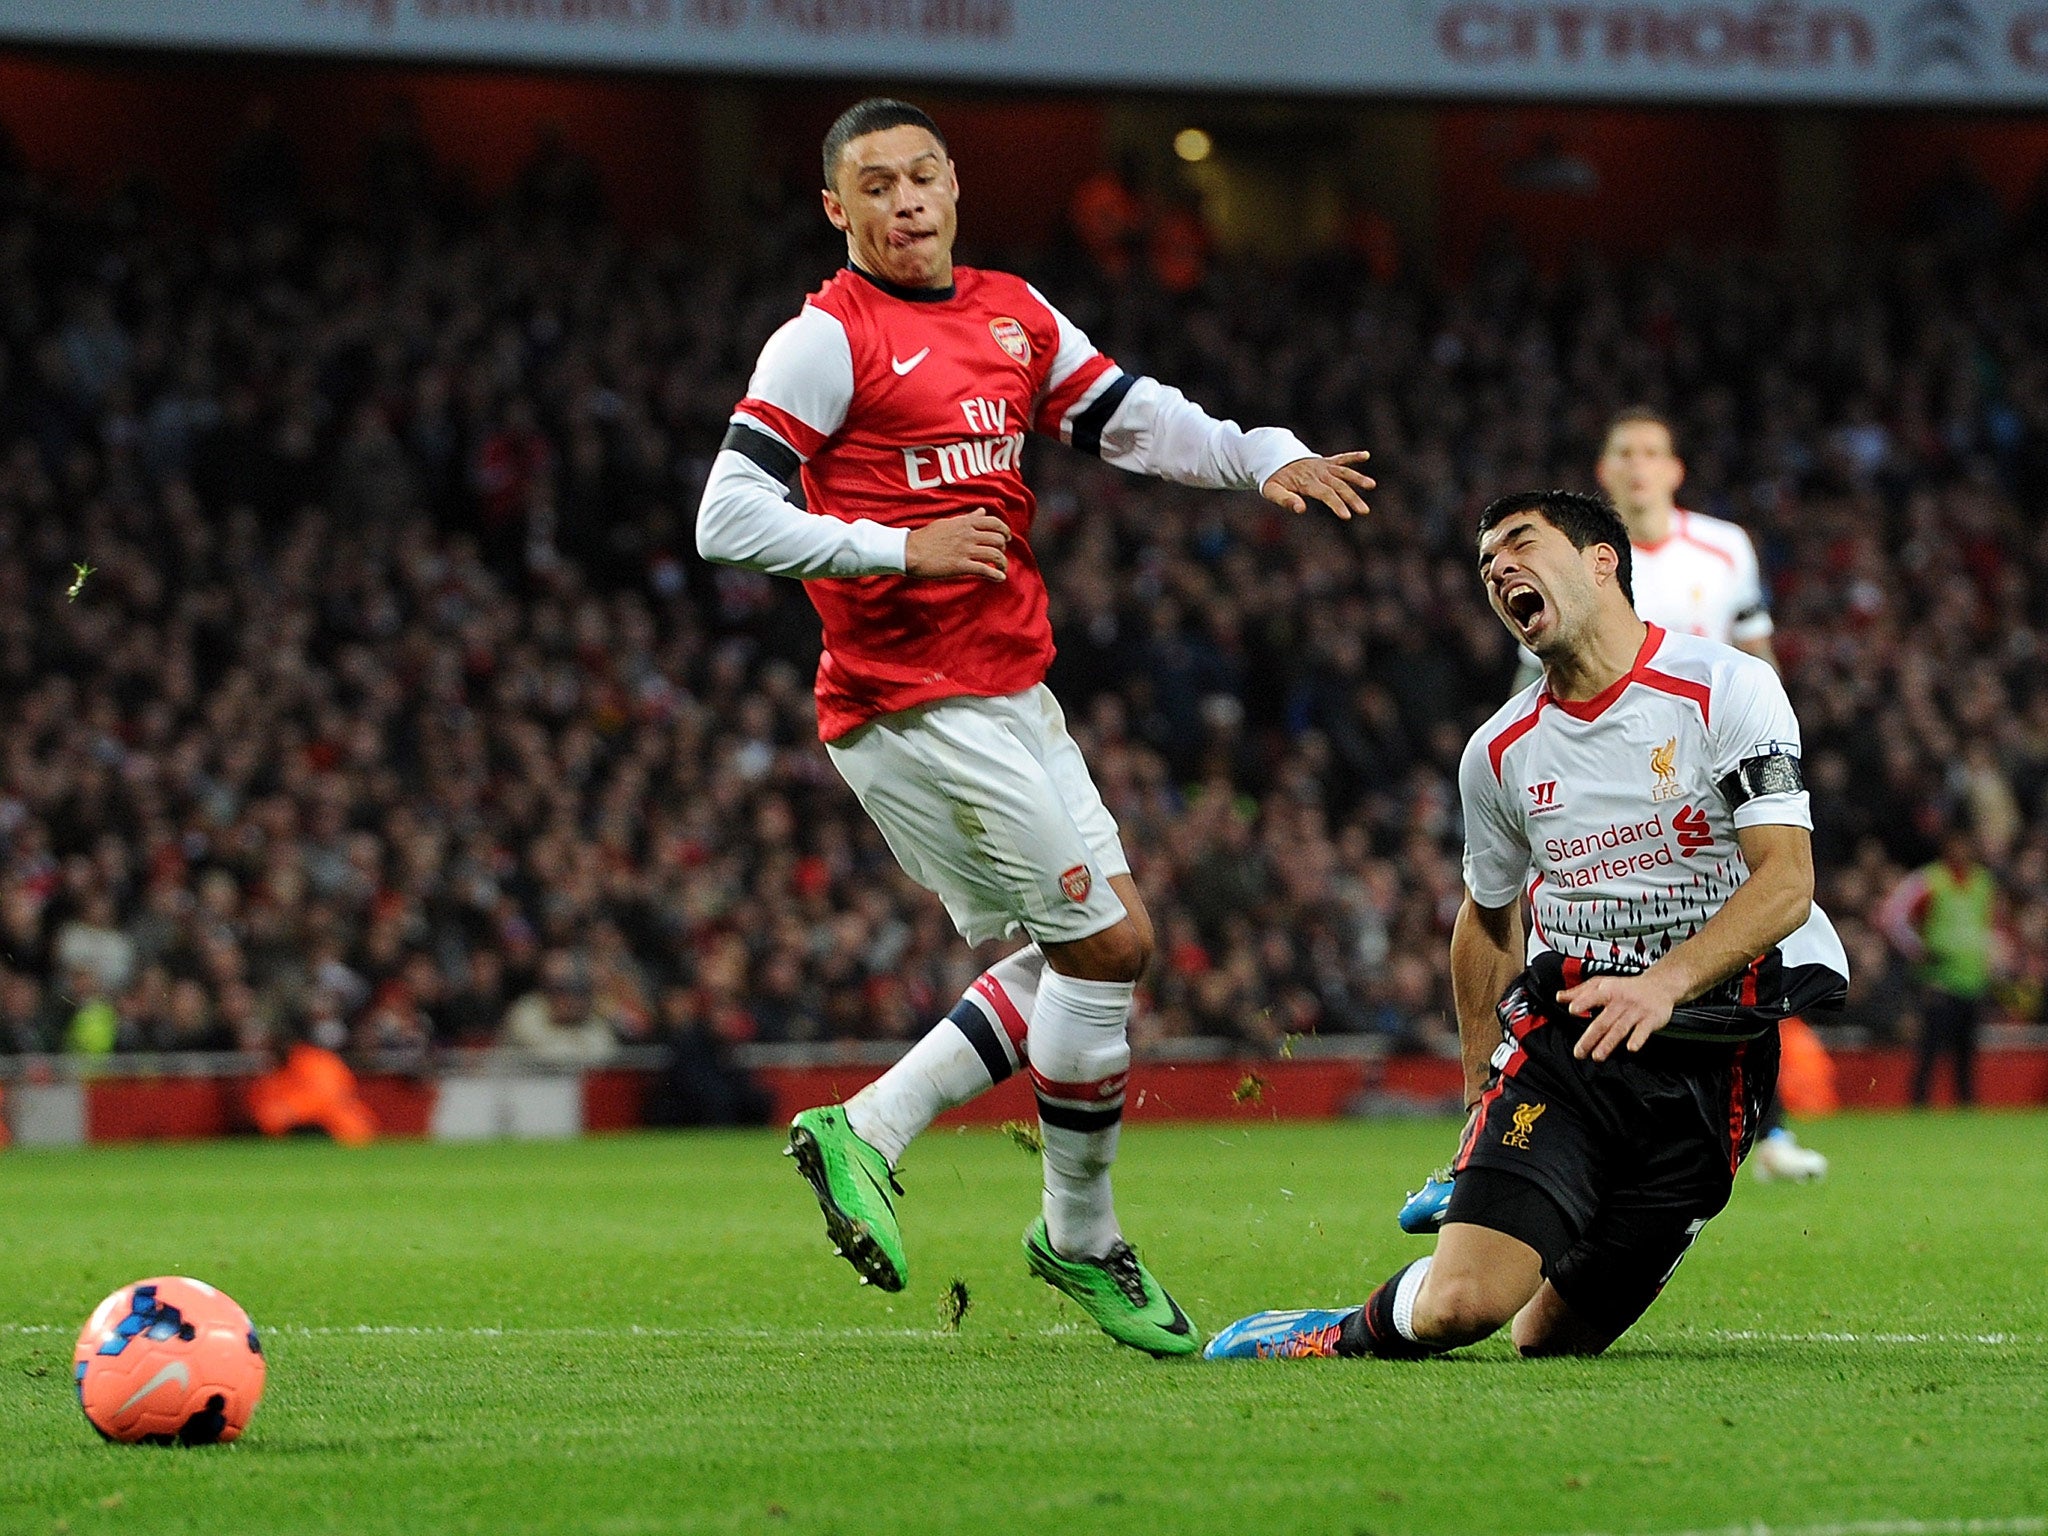 Luis Suarez of Liverpool is fouled in the box by Alex Oxlade-Chamberlain of Arsenal